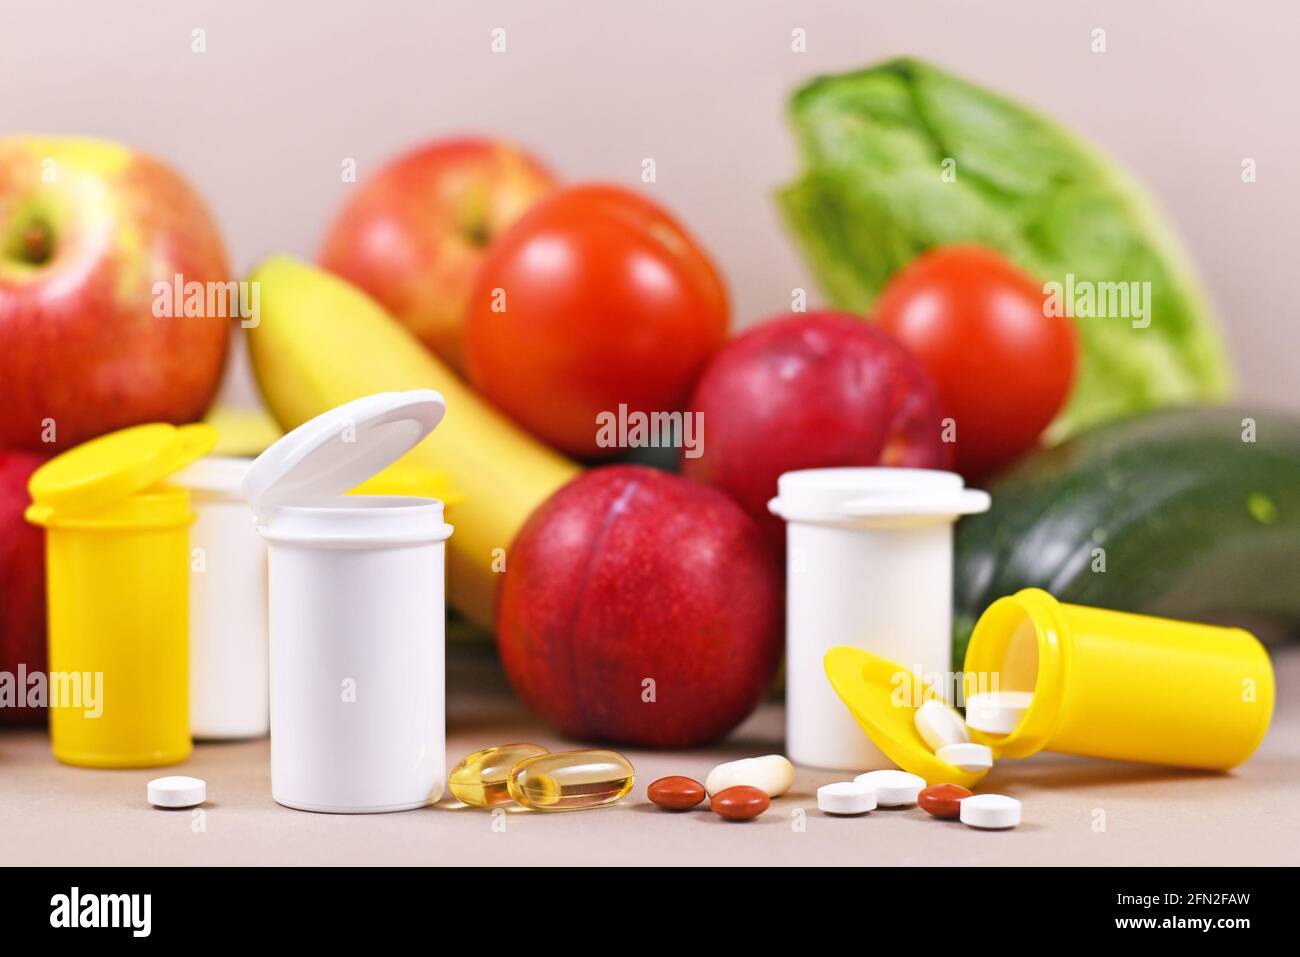 Pills of food nutrition supplements in front of fruits and vegetables in background Stock Photo